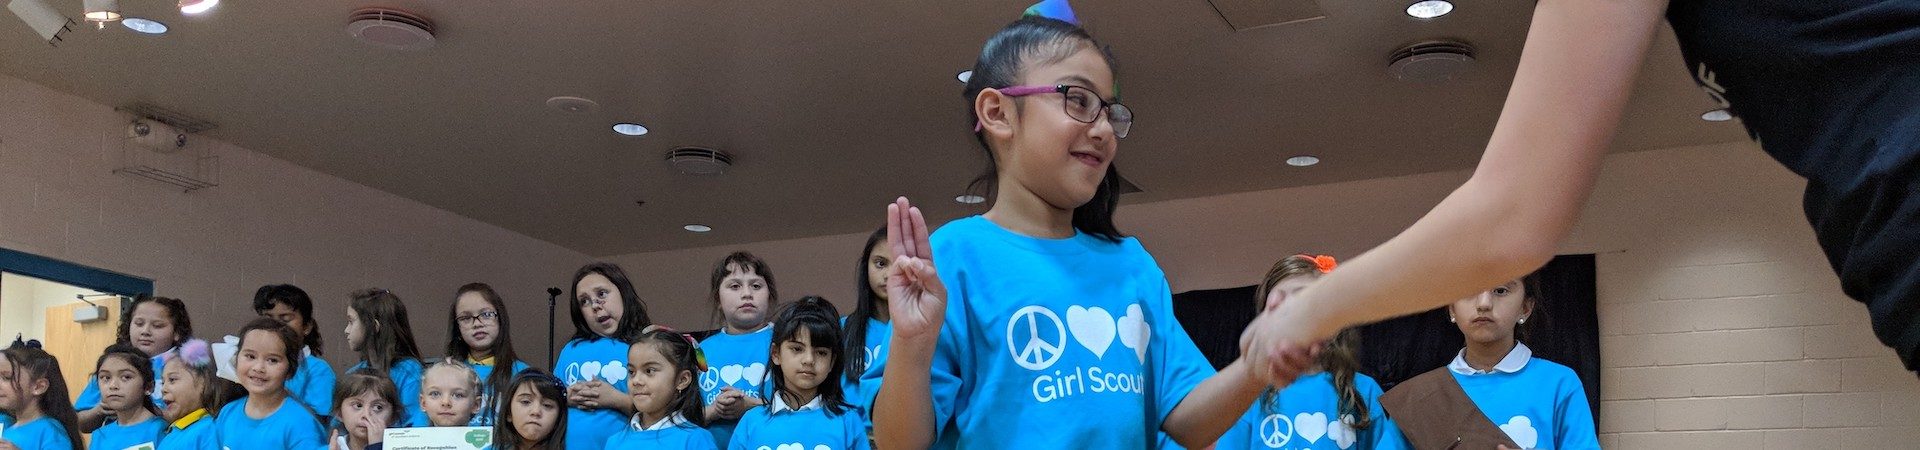  girl scout shakes staff hand at investiture ceremony 